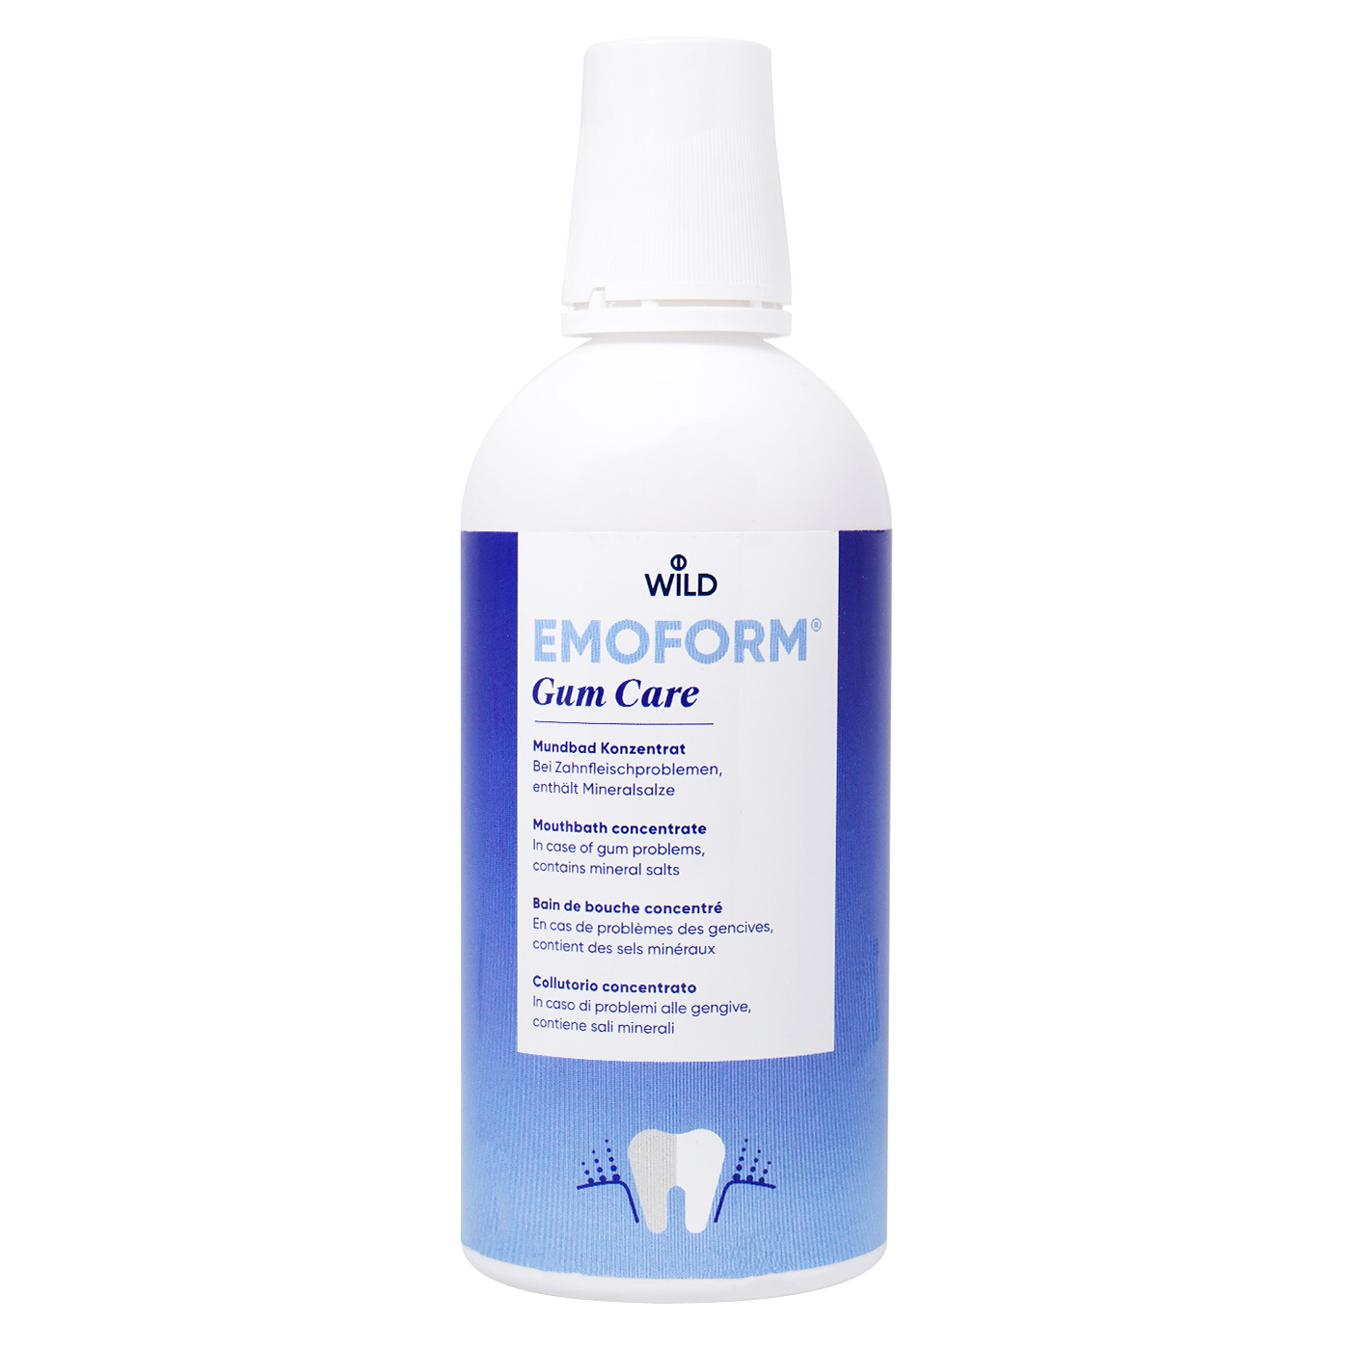 Emoform Gum Care mouth rinse with fluoride-free mineral salts for gum care